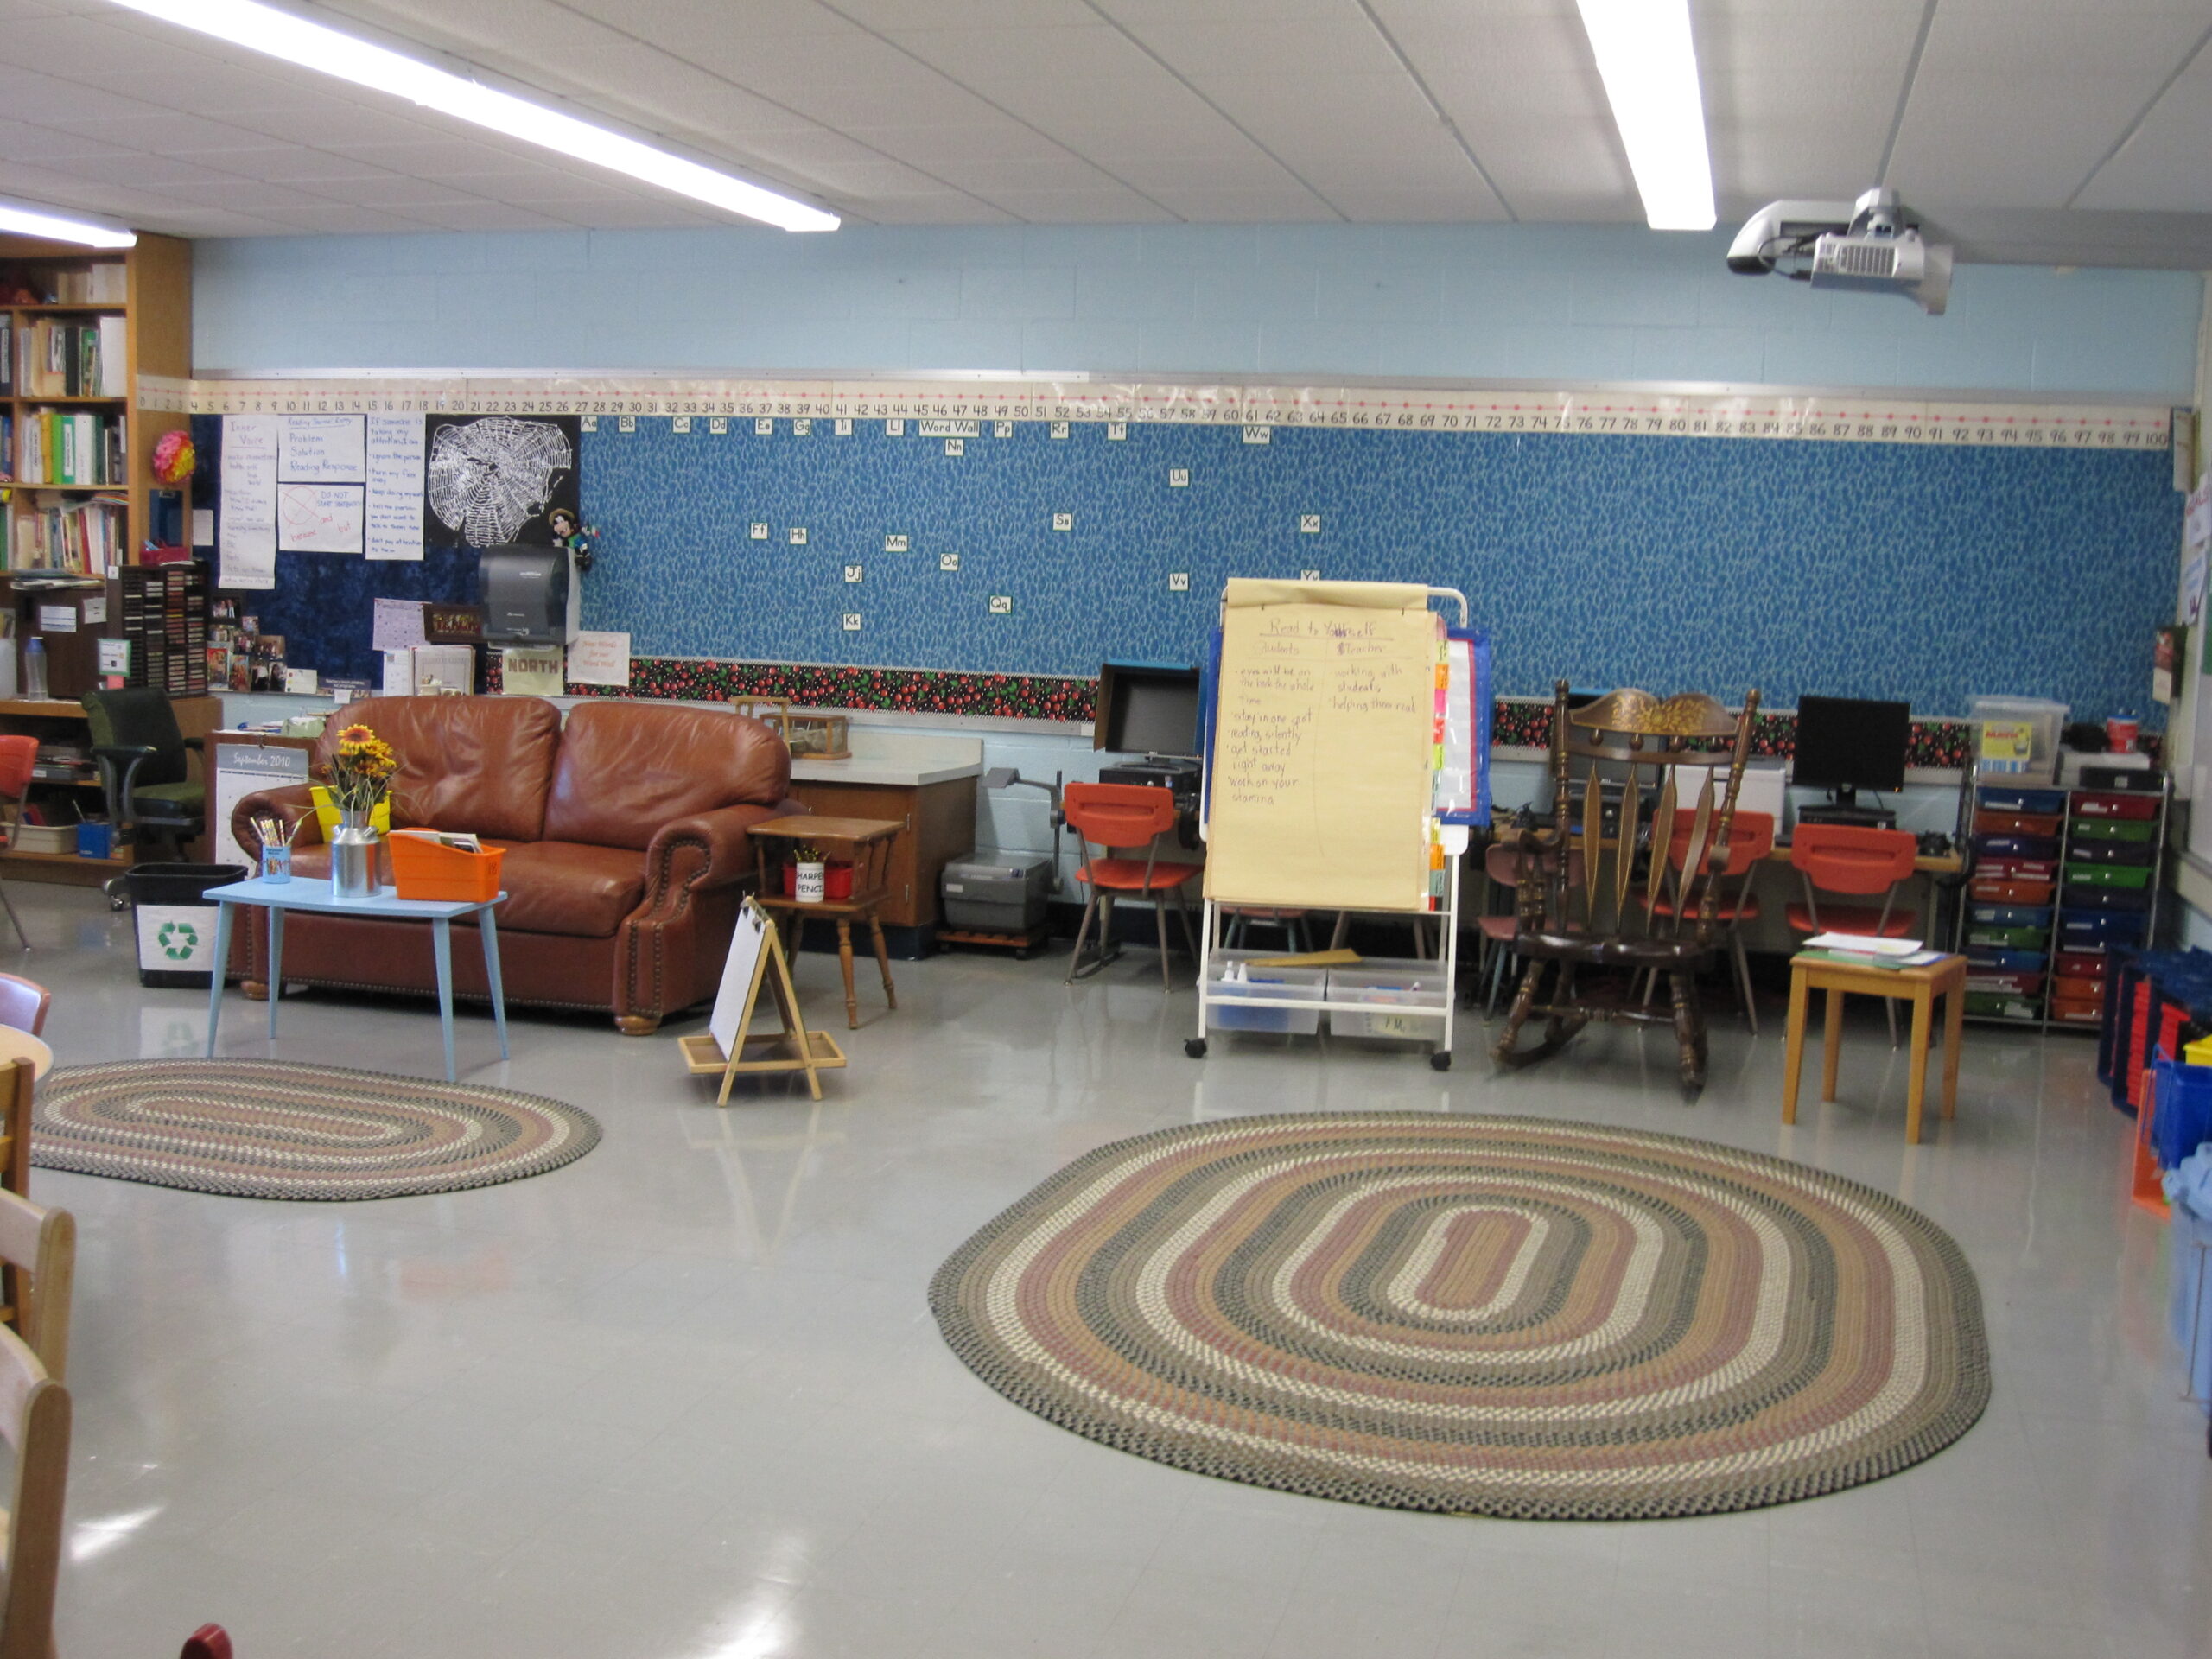 Thoughts about setting up a classroom during COVID.